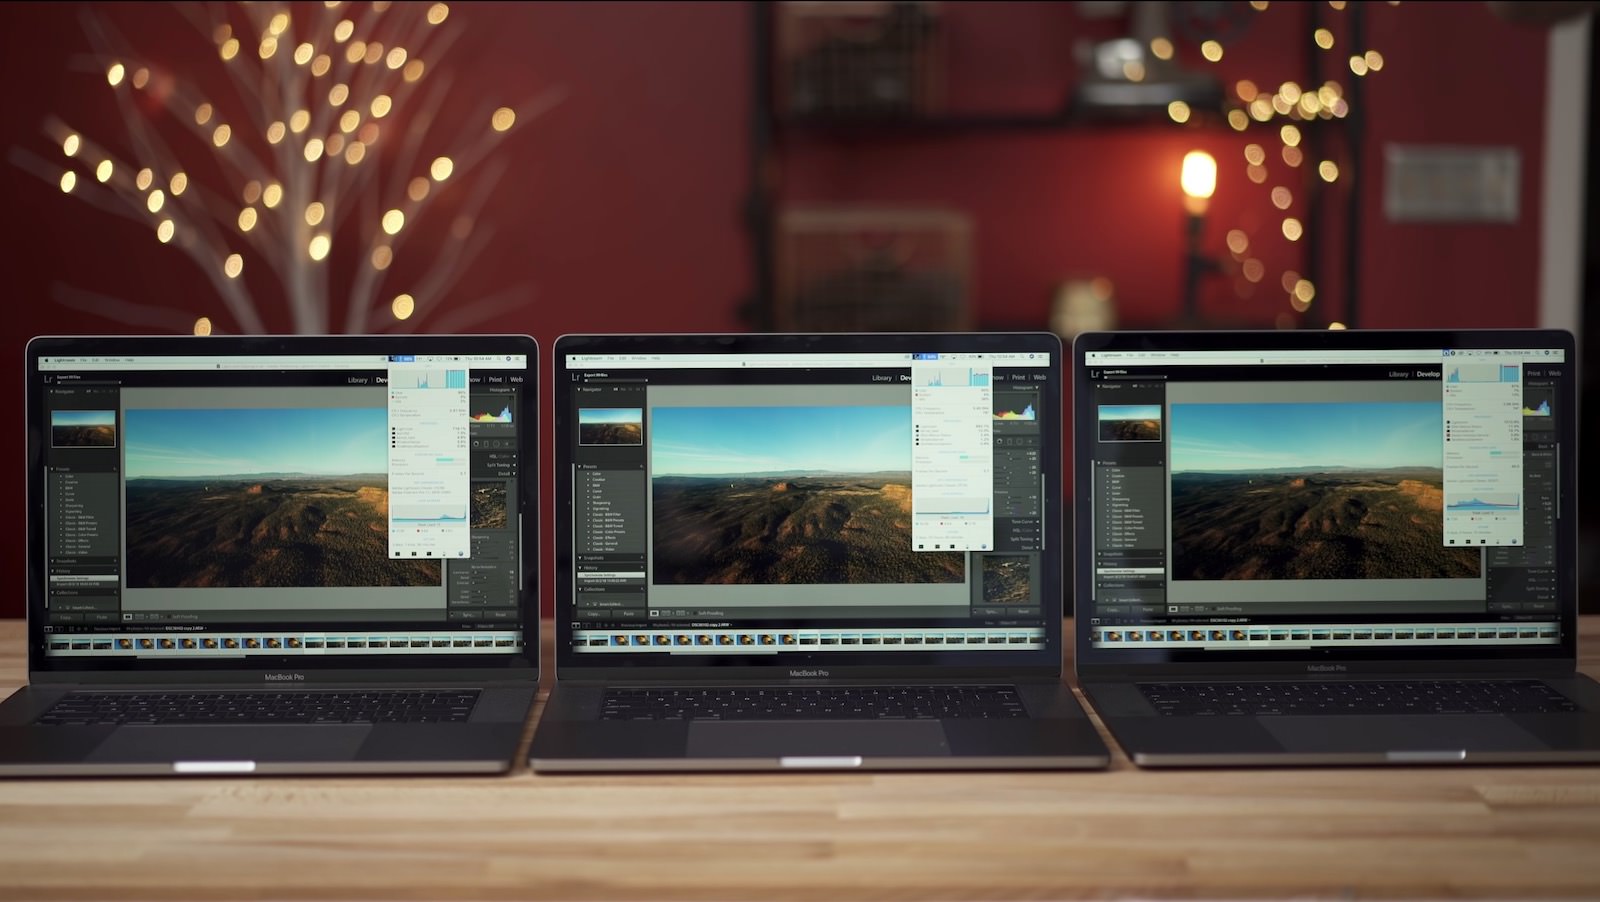 MacBook-Pro-2018-15inch-models-for-Photo-Editing.jpg